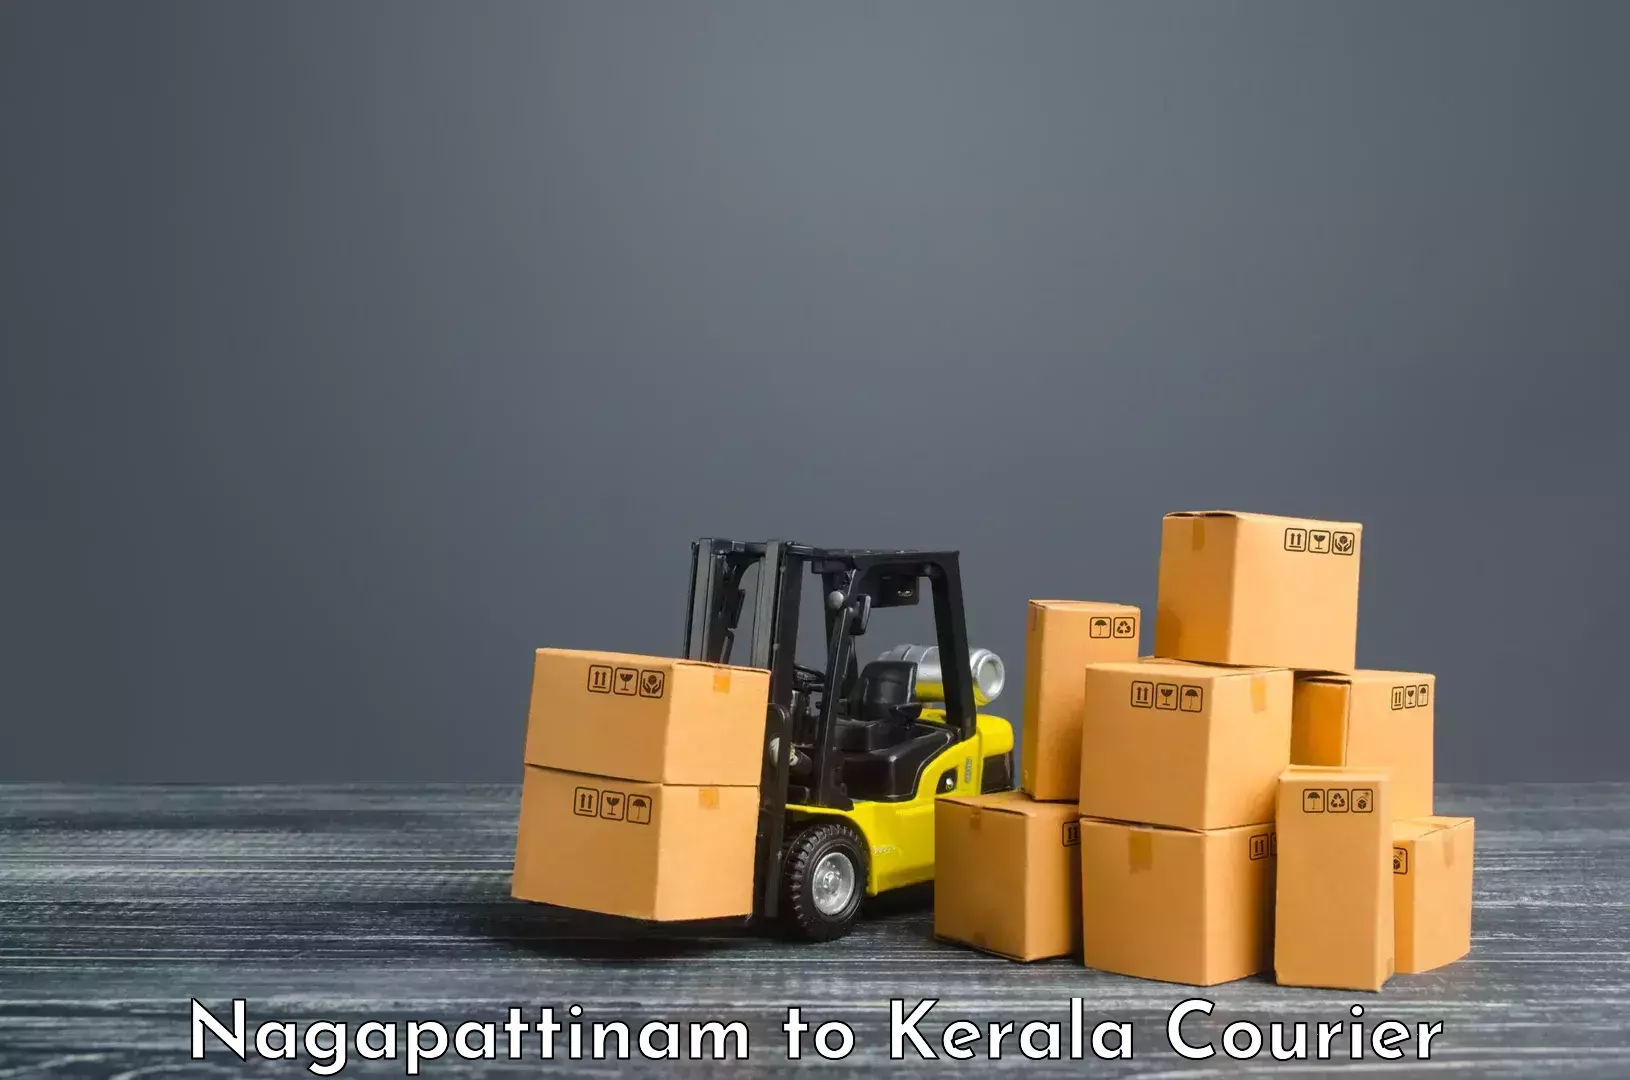 Express delivery capabilities in Nagapattinam to Angamaly